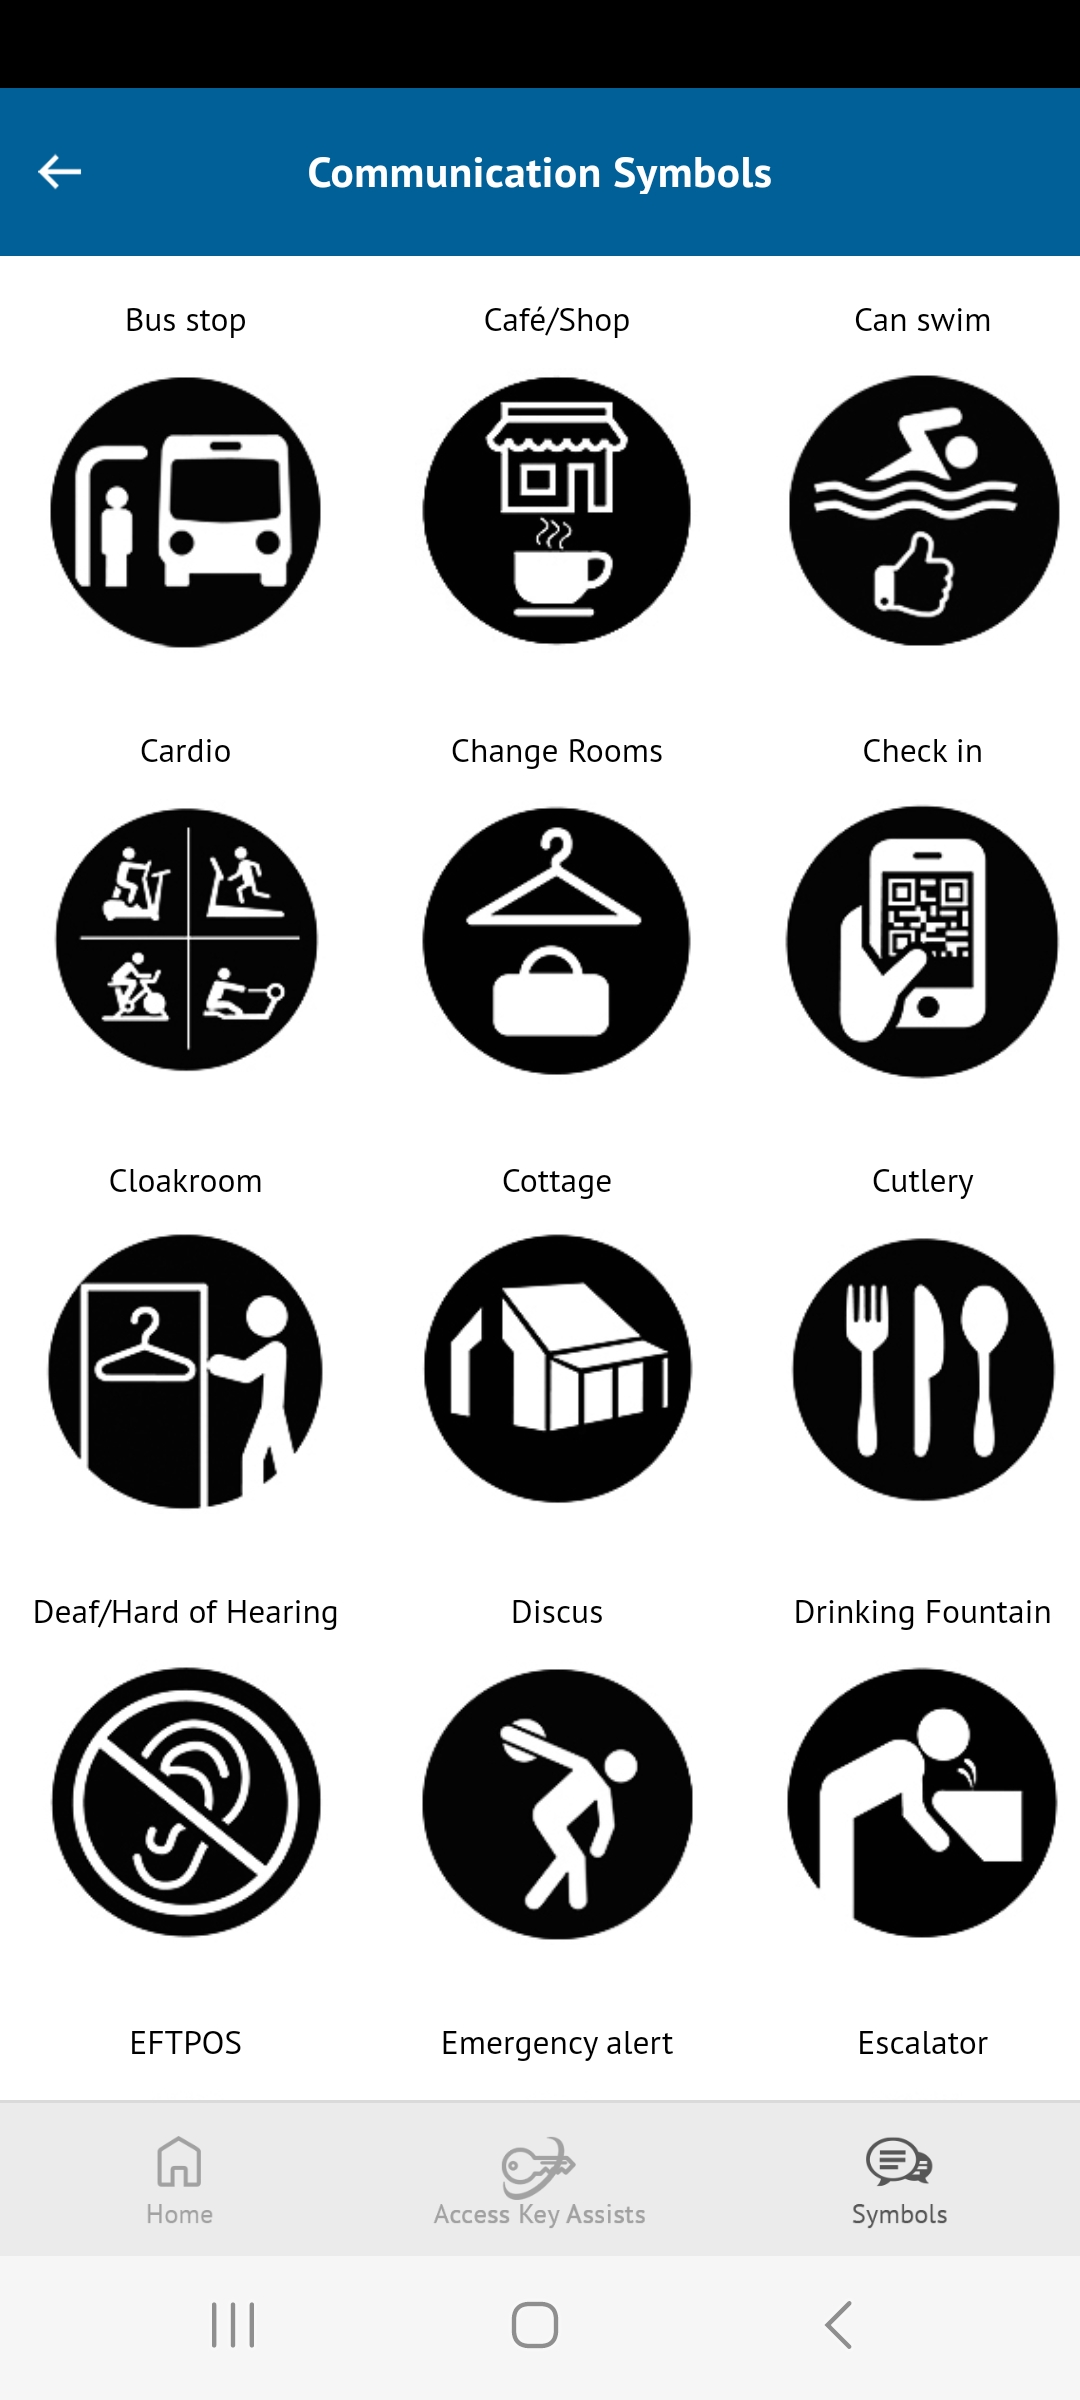 Scout+ app communication symbol screen showing various visual black and white symbols